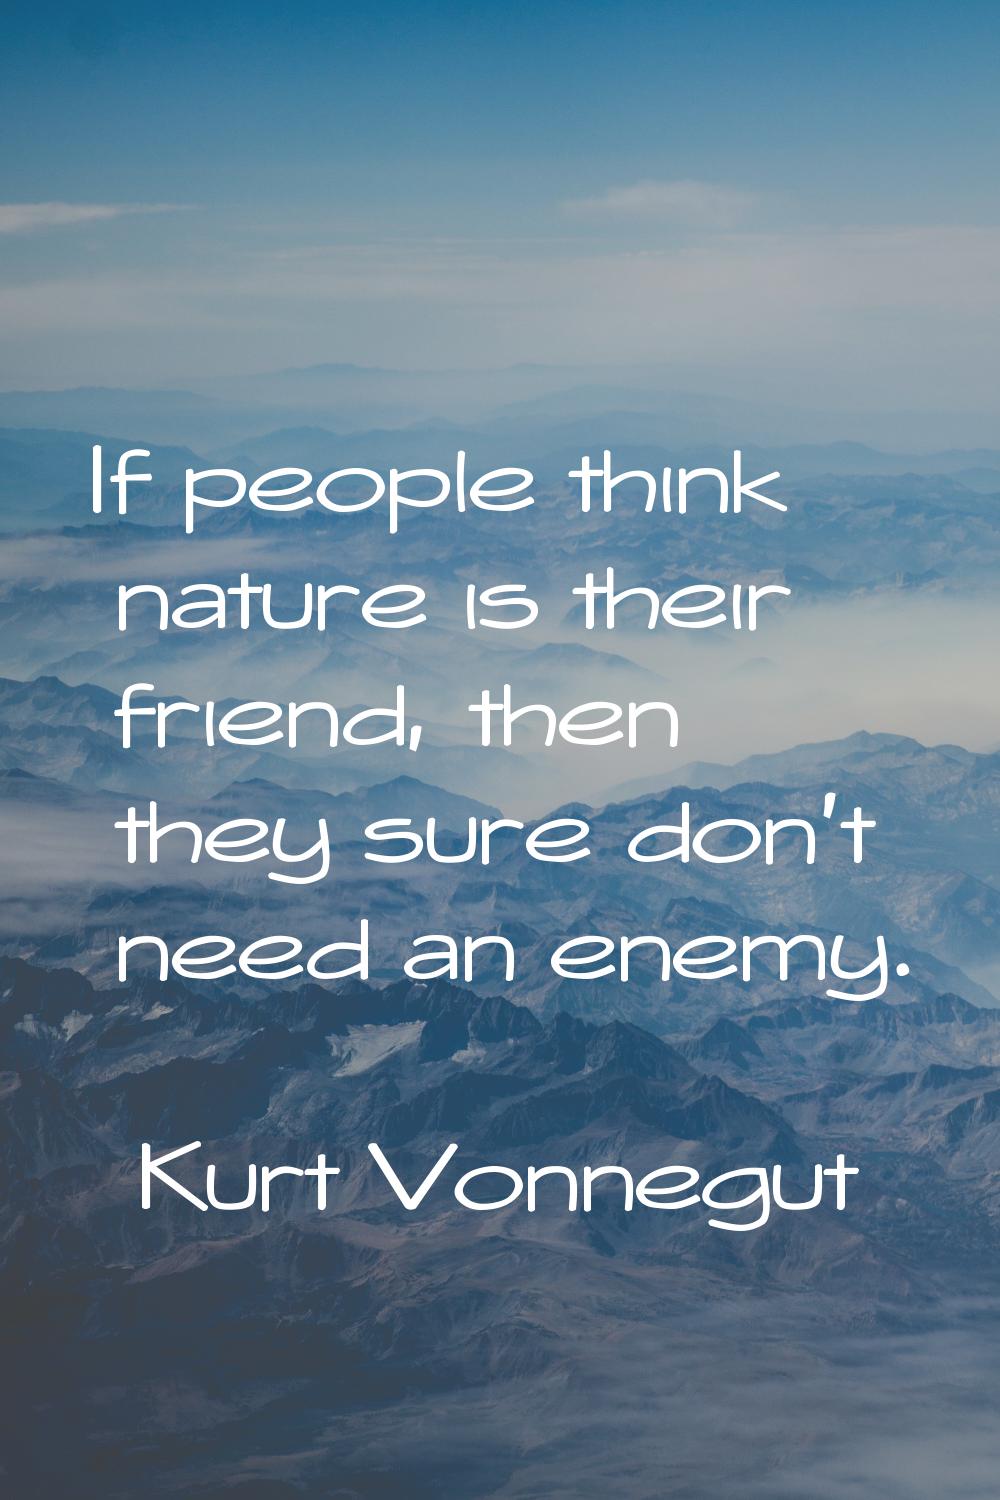 If people think nature is their friend, then they sure don't need an enemy.